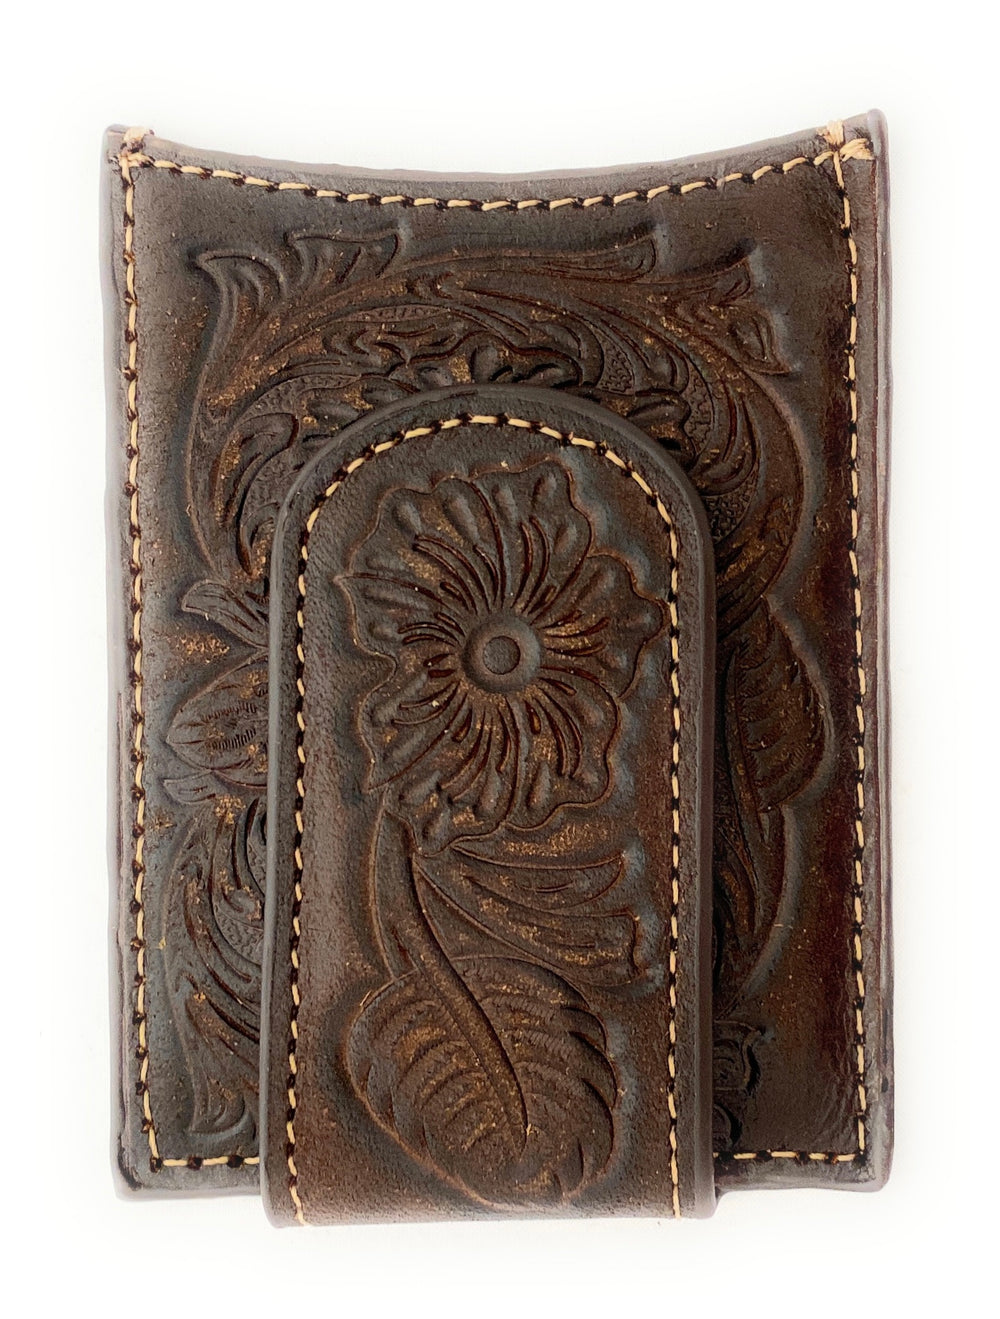 Ariat Mens Leather Tooled Card Case - Brown